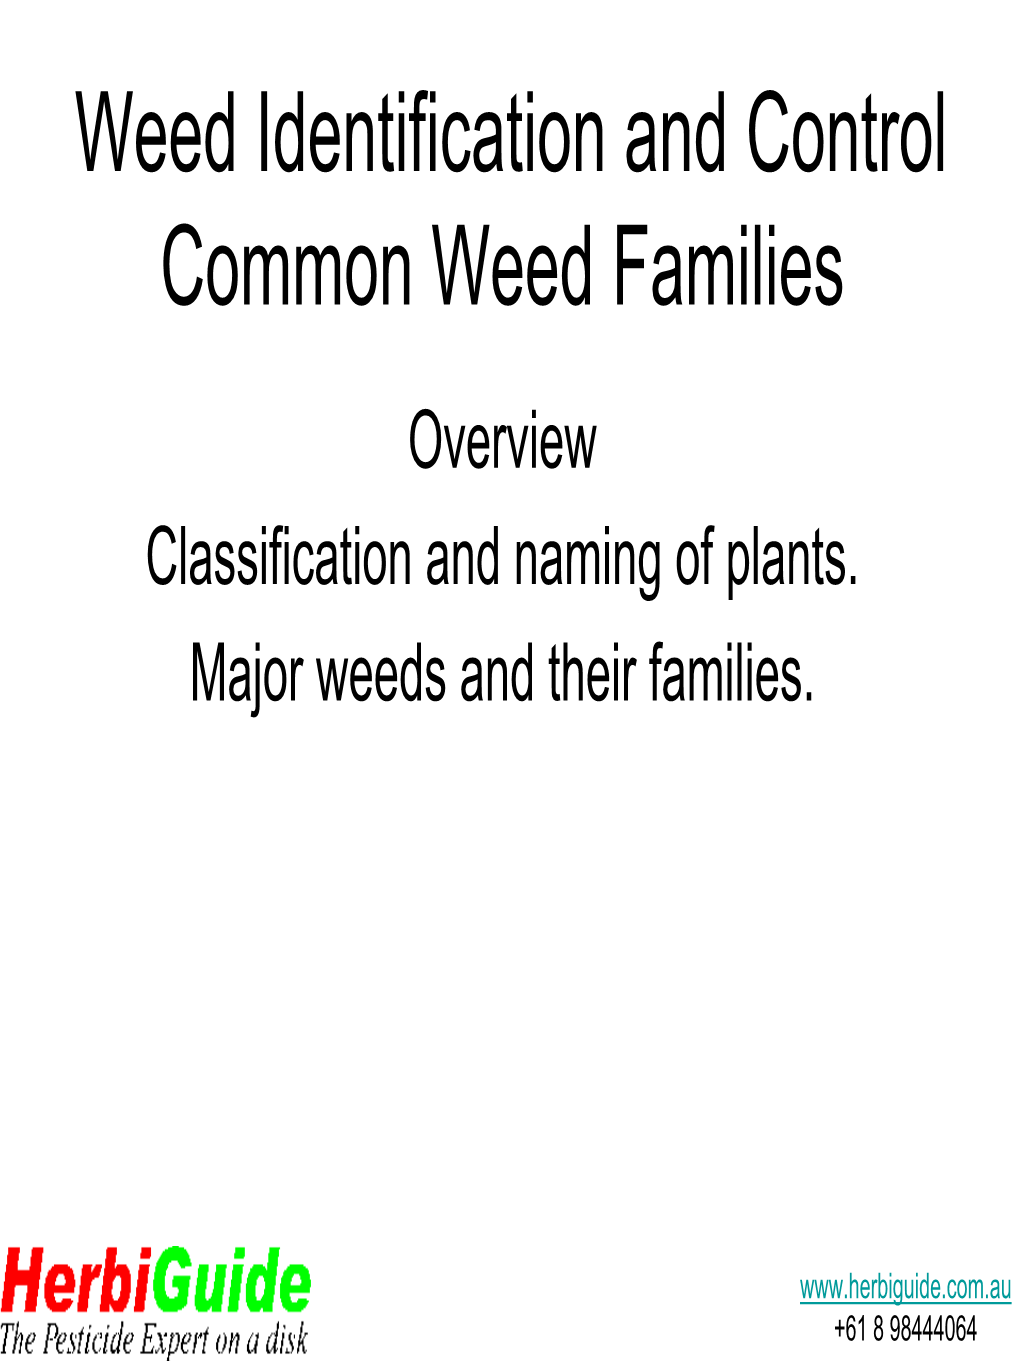 Weed Identification and Control Common Weed Families Overview Classification and Naming of Plants